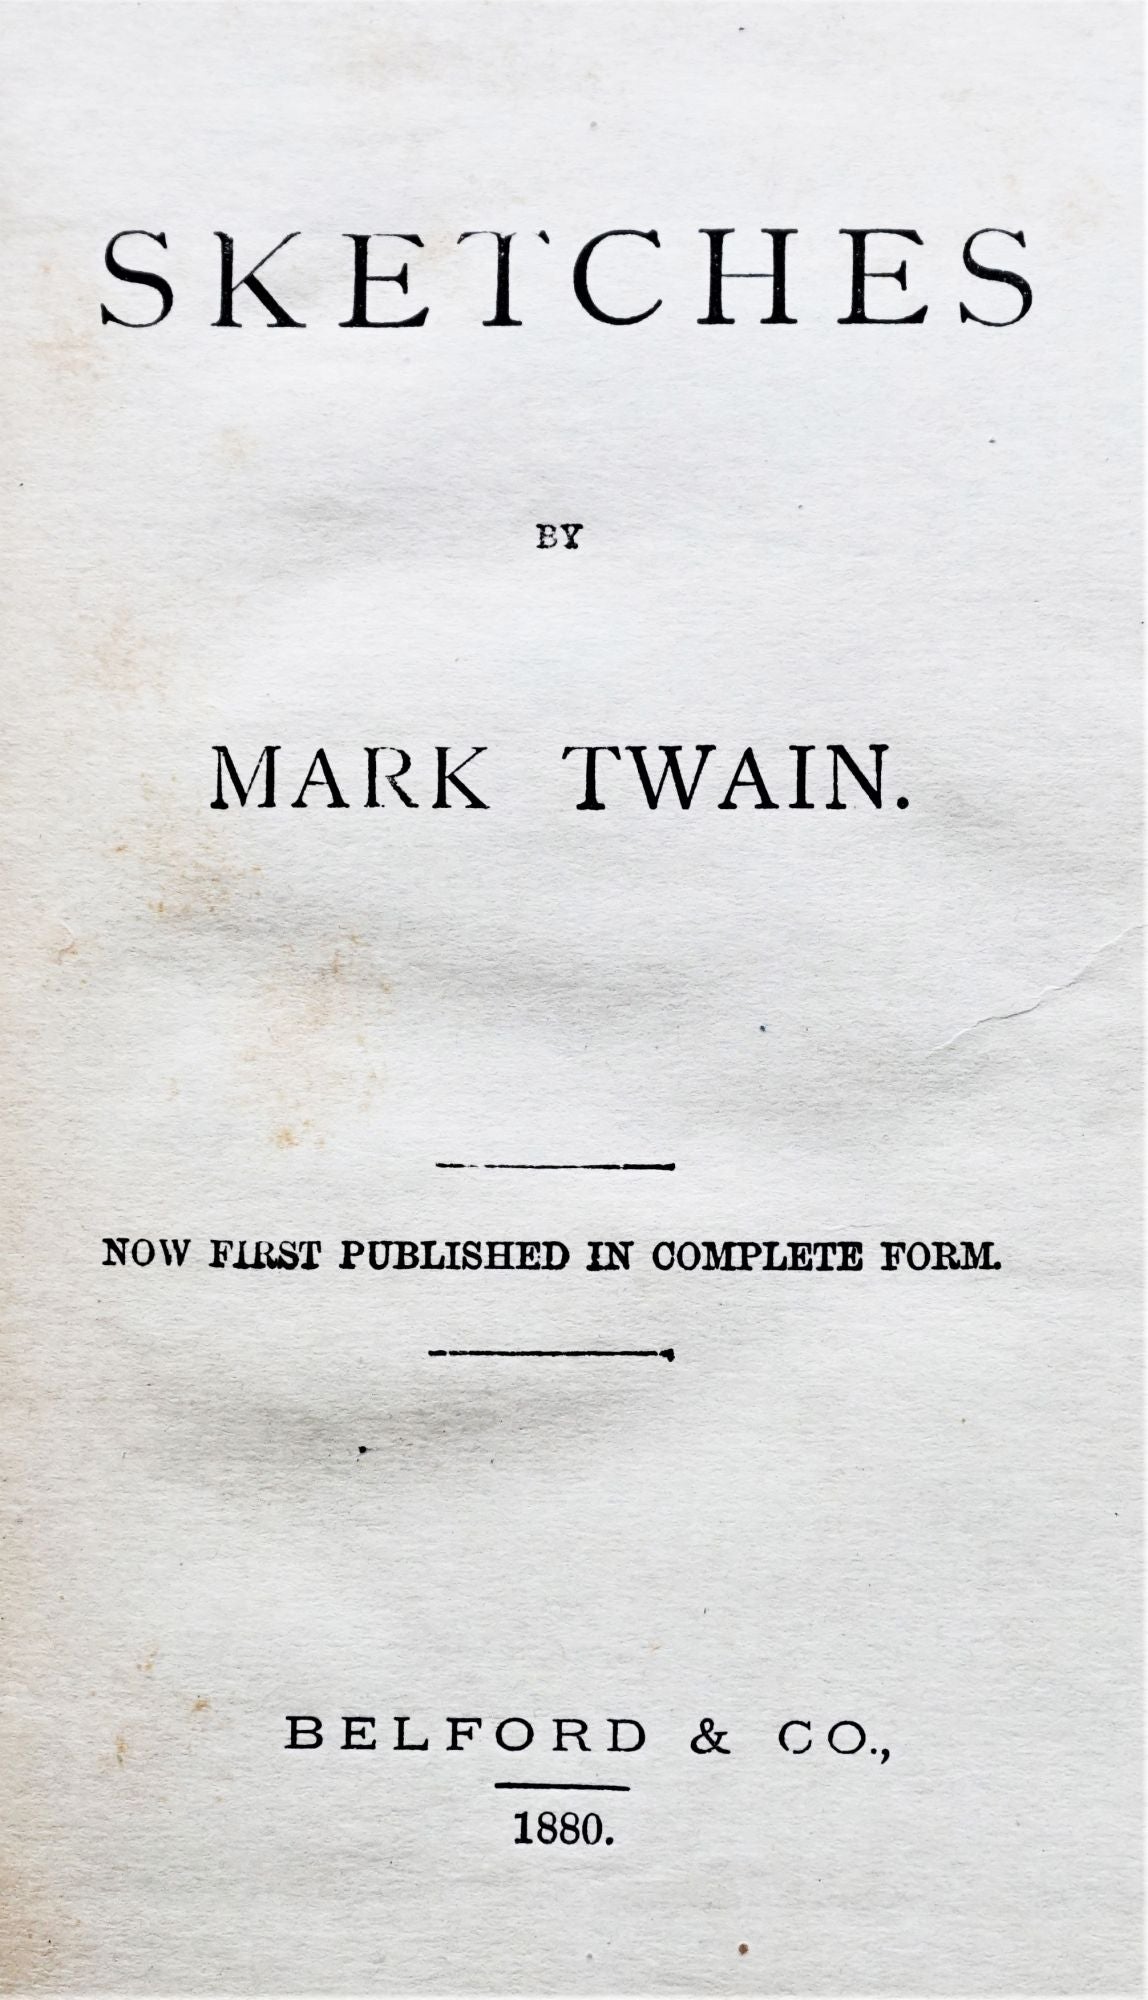 Mark Twain sketches 小品文 essays 散文 sketches 小品文 essays 散文 A onetime printer  and Mississippi River boat pilot Mark Twain became one of Americas  ppt  download